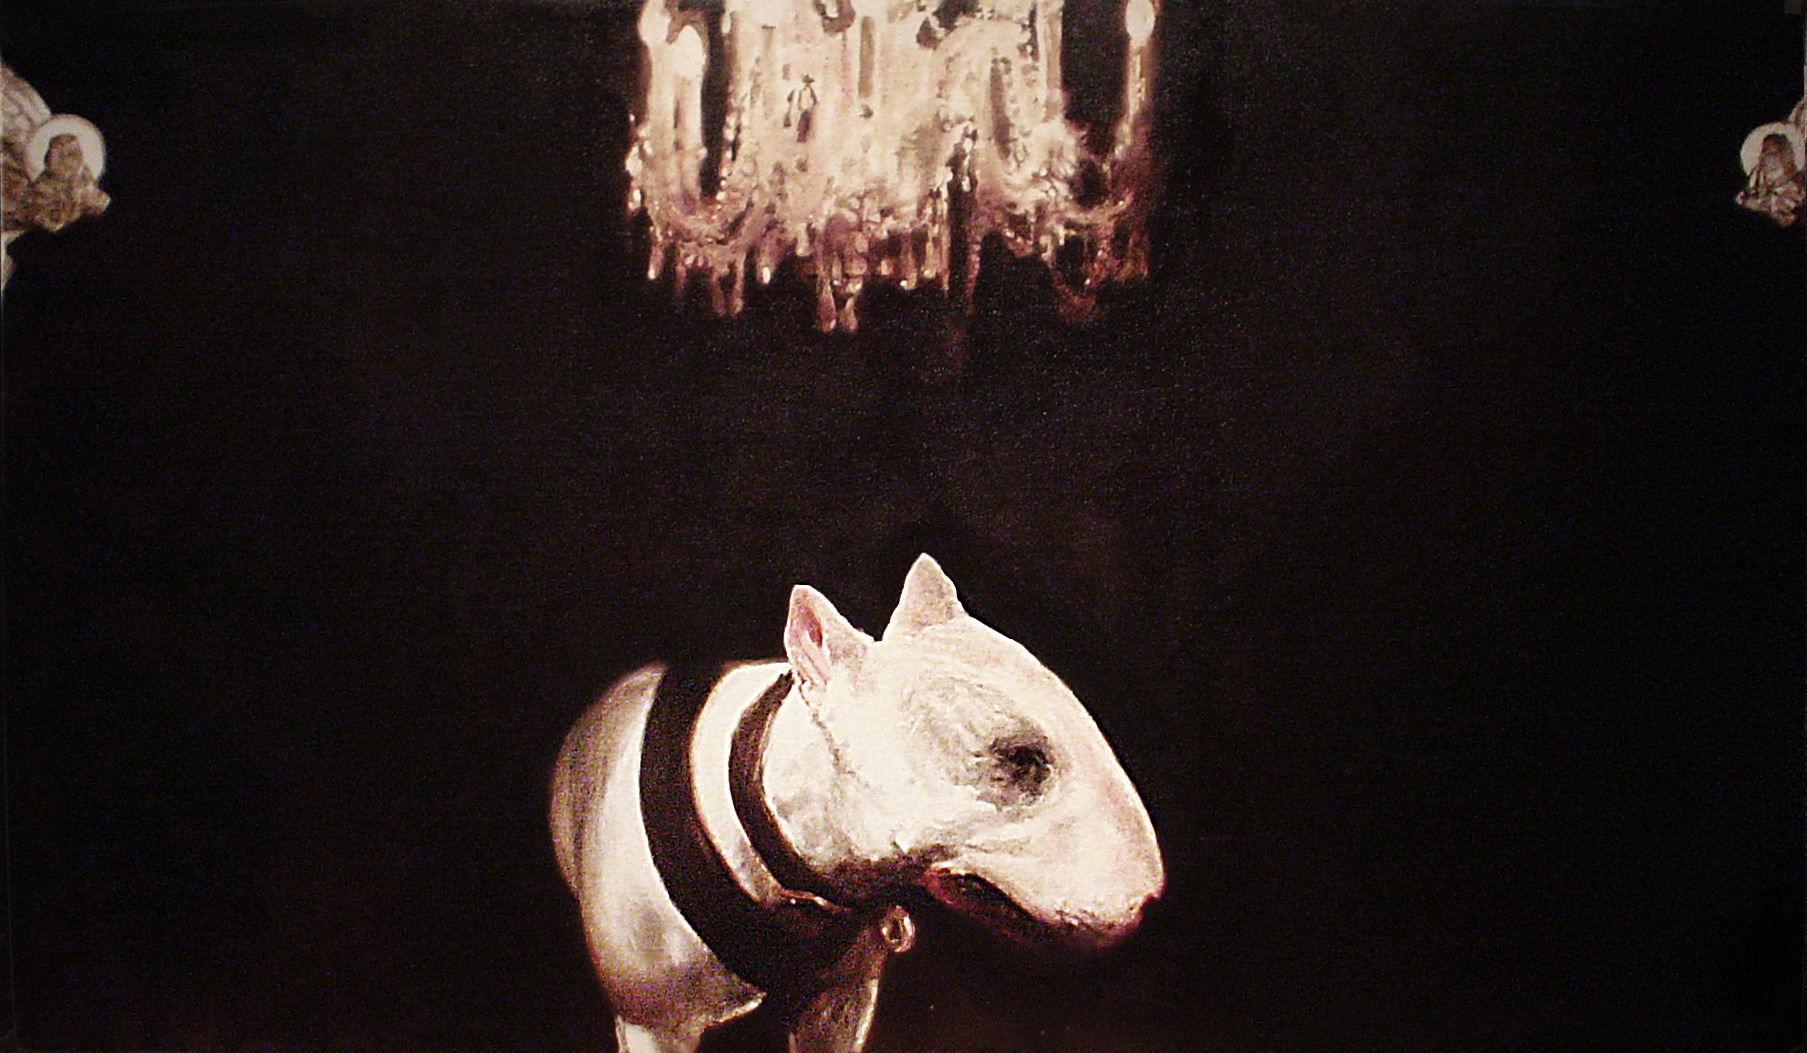 White Bullterrier with Angels - 2003, oil on canvas, 160 x 280 cm, private collection, RO - 3